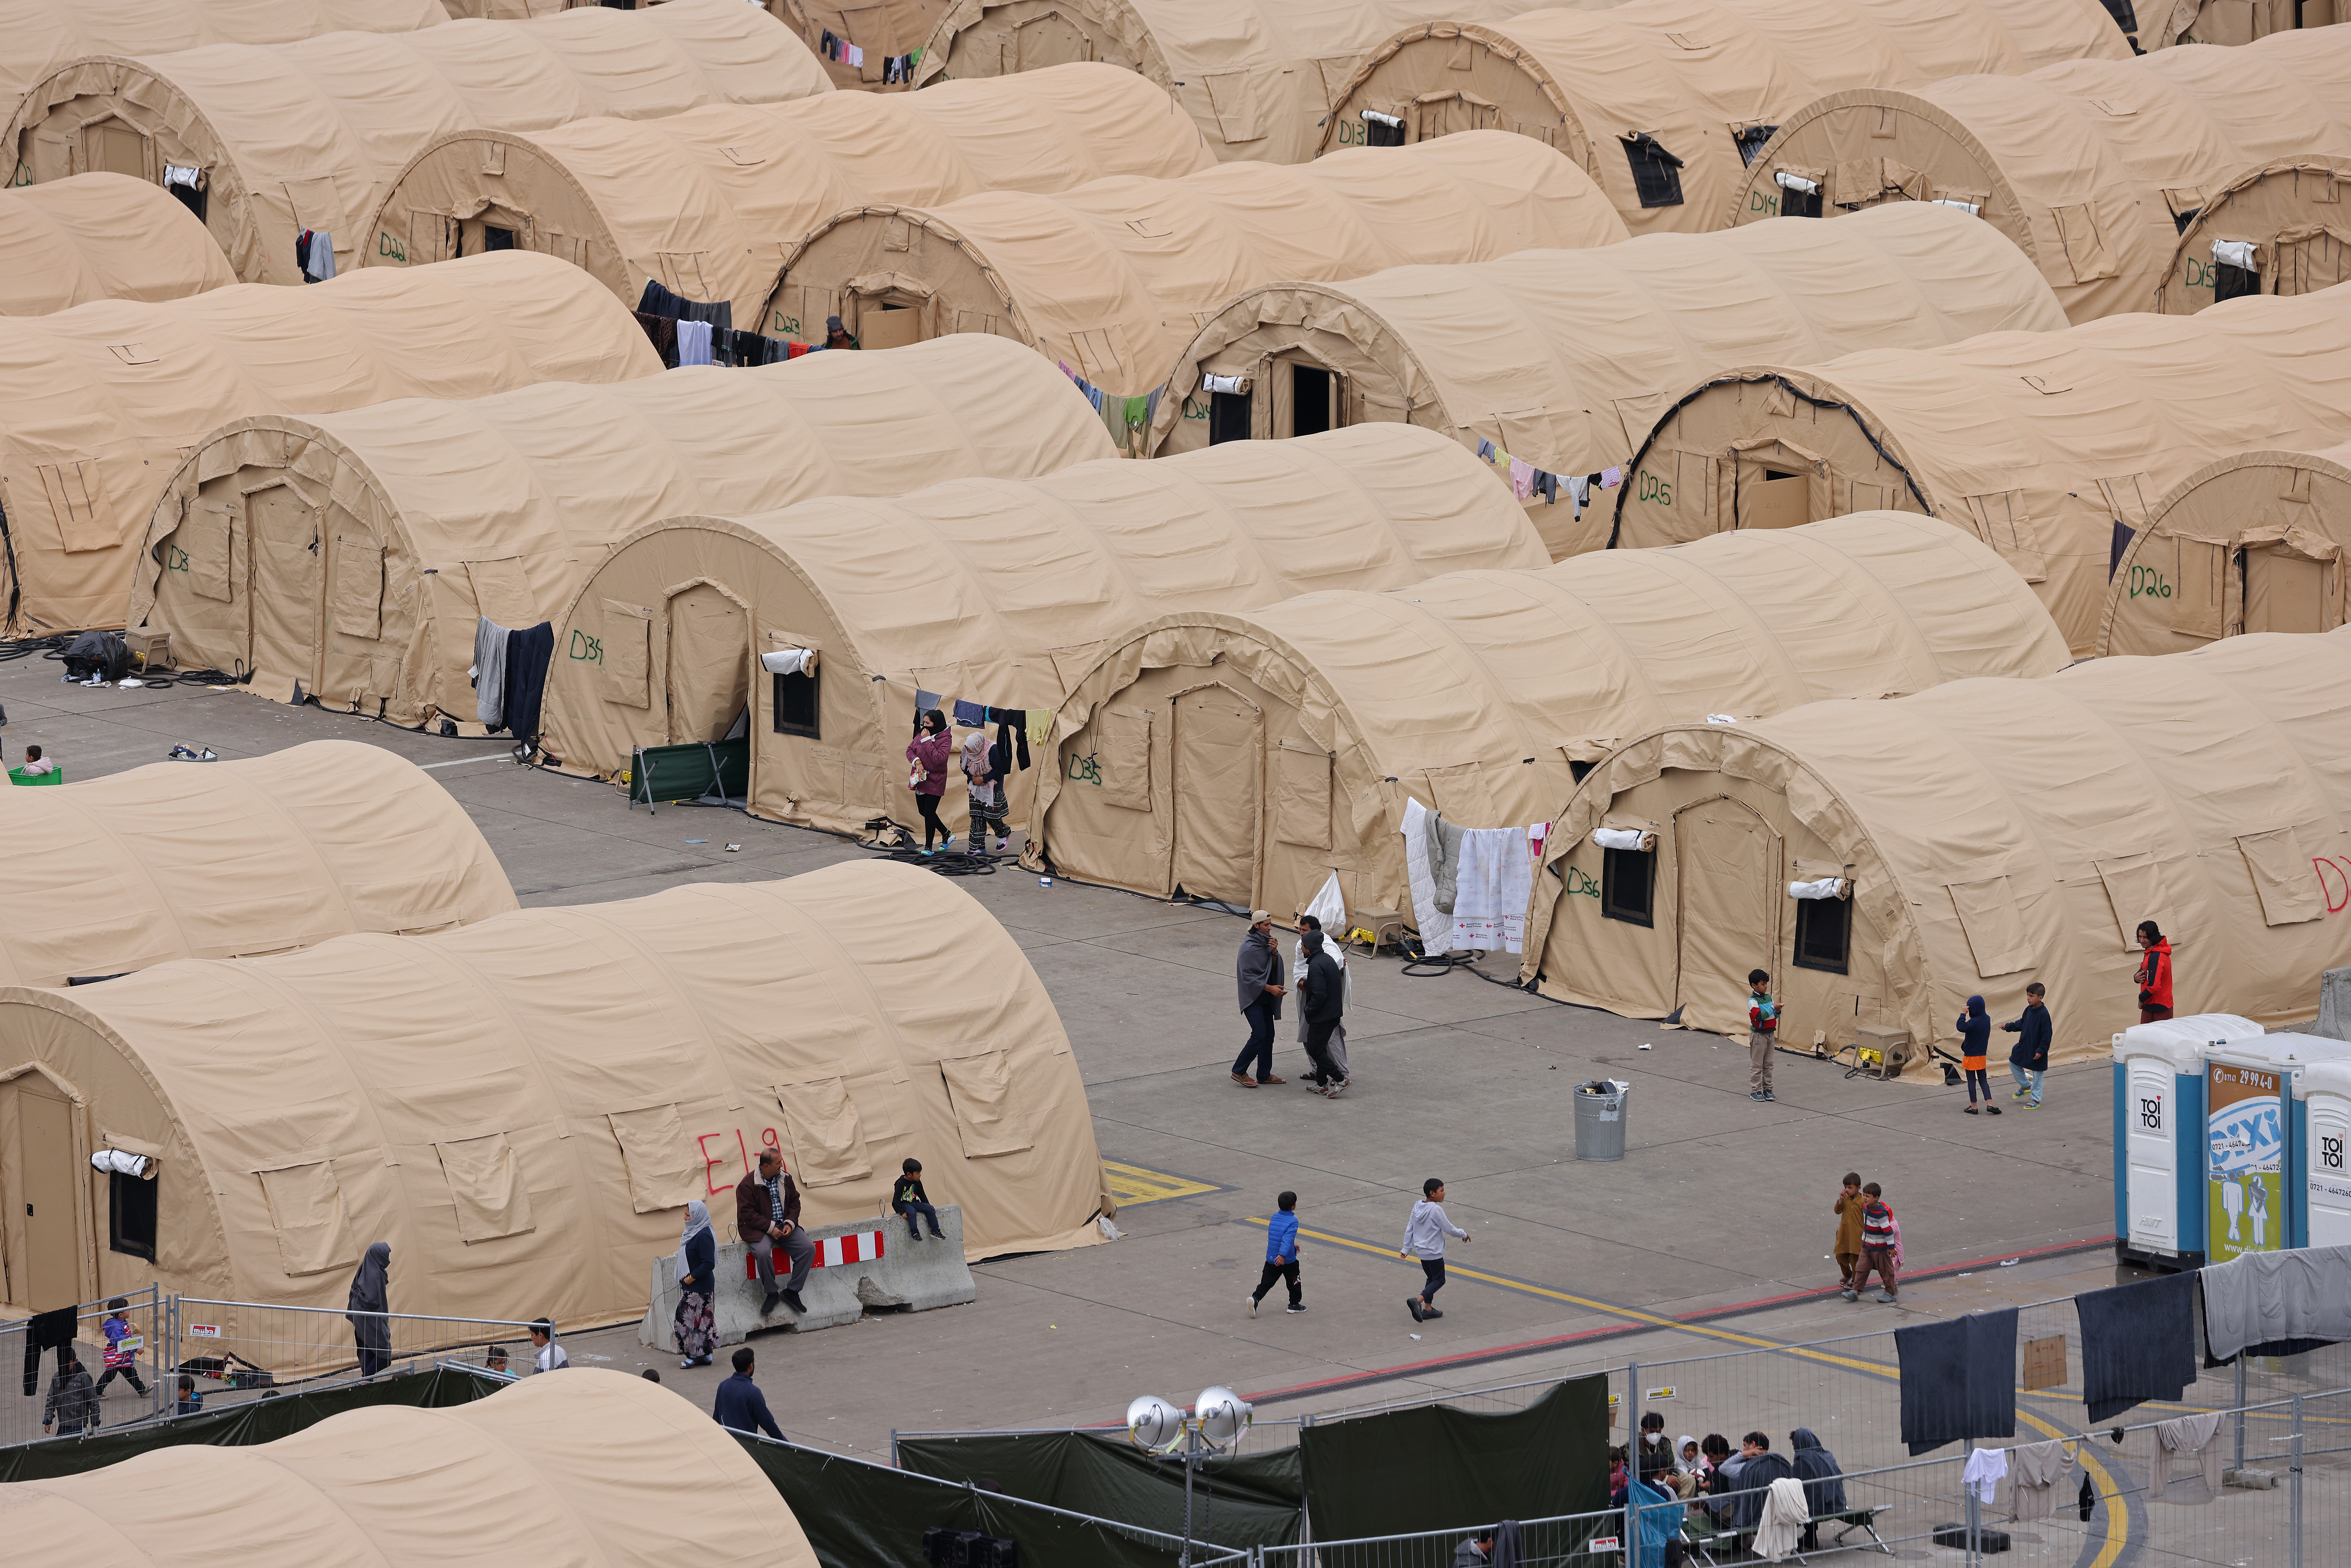 RAMSTEIN-MIESENBACH, GERMANY - SEPTEMBER 20: Children and adults while away time at a tent city of temporary accommodation built by the United States Air Force for evacuees from Afghanistan at Ramstein Air Base on September 20, 2021 in Ramstein-Miesenbach, Germany. Approximately 6,000 evacuees are currently at the base, with approximately another 3,000 at nearby U.S. Rhine Ordinance Barracks. Medical personnel administered a first round of vaccinations against Covid-19 to the evacuees over the last few days, which means no evacuees will be able to journey onward to the United States for at least two weeks until they get their second inoculation. So far approximately 34,000 Afghan evacuees have passed through Ramstein on their way to resettlement in the U.S. (Photo by Sean Gallup/Getty Images)